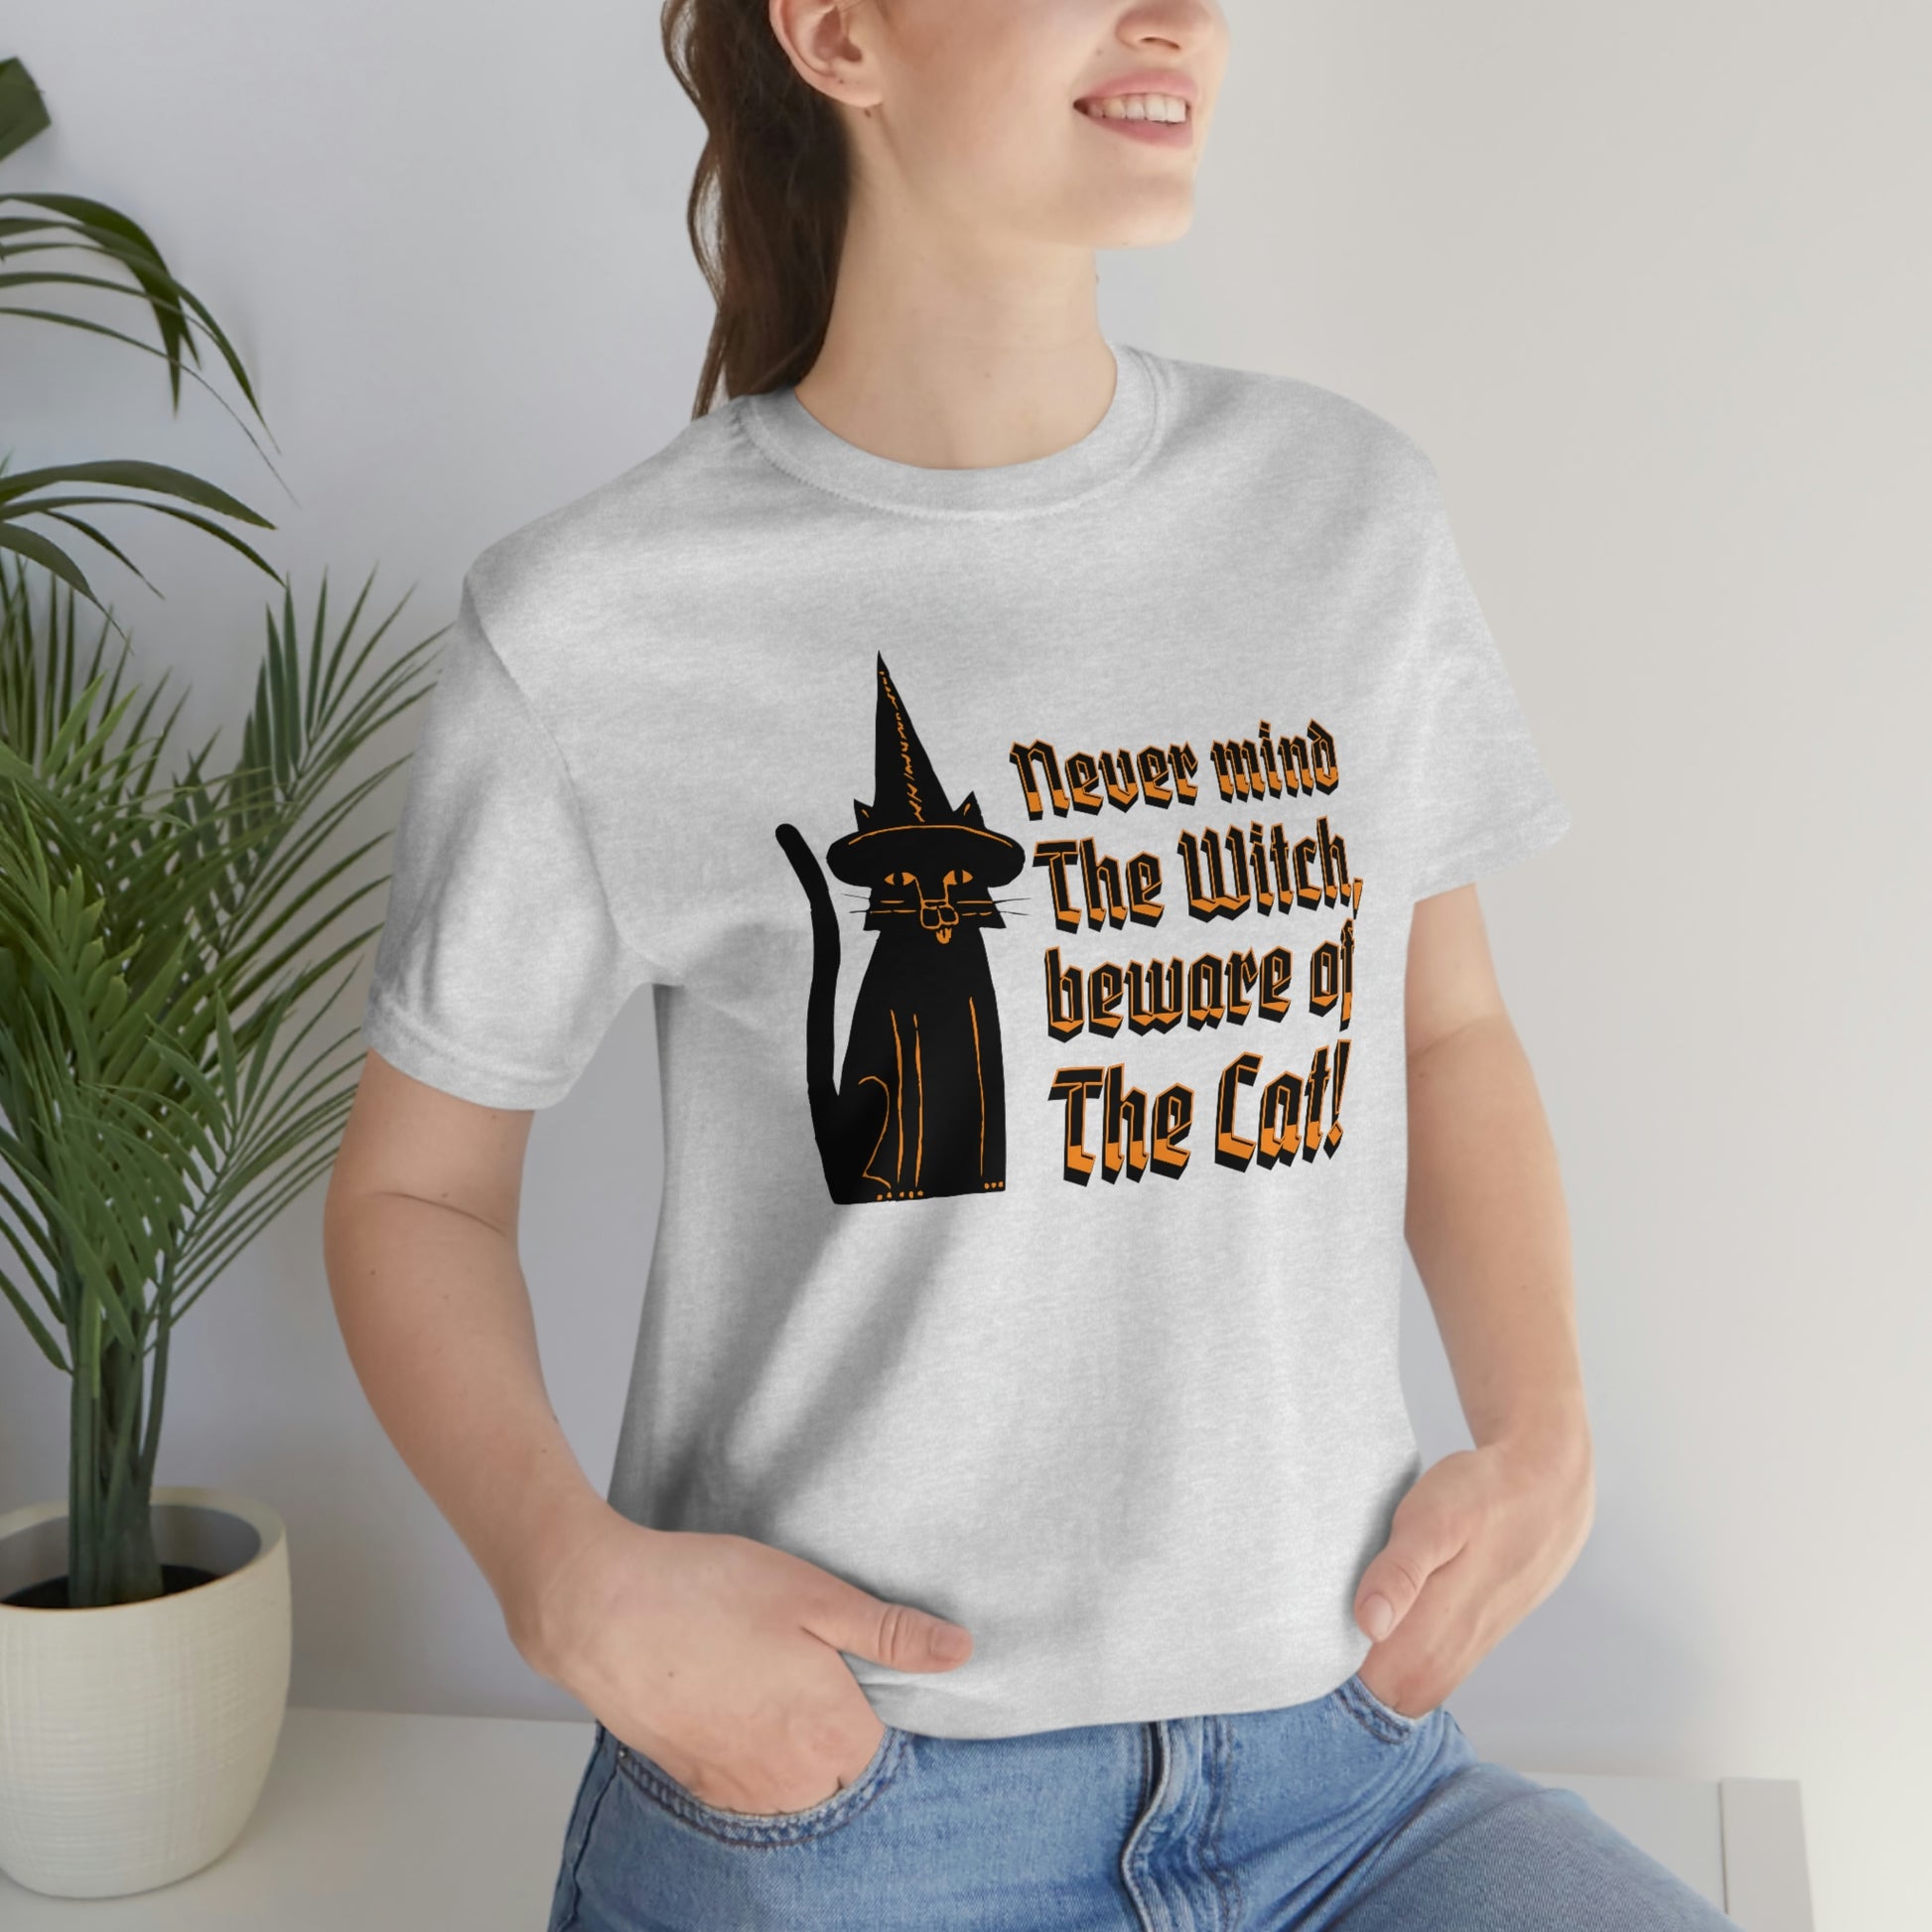 Witchy black cat T-shirt, witch cat familiar shirt, vintage tshirt, aesthetic shirt, celestial shirt, magical tee, mystical tee, gothic tee